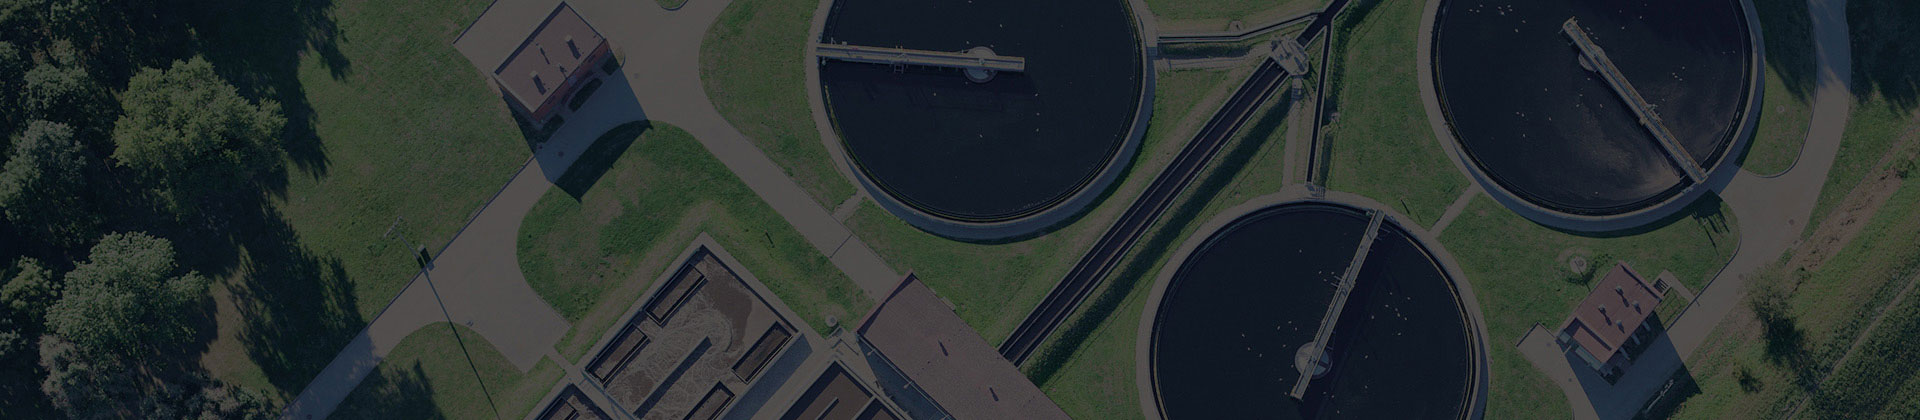 Aerial view of a wastewater treatment plant